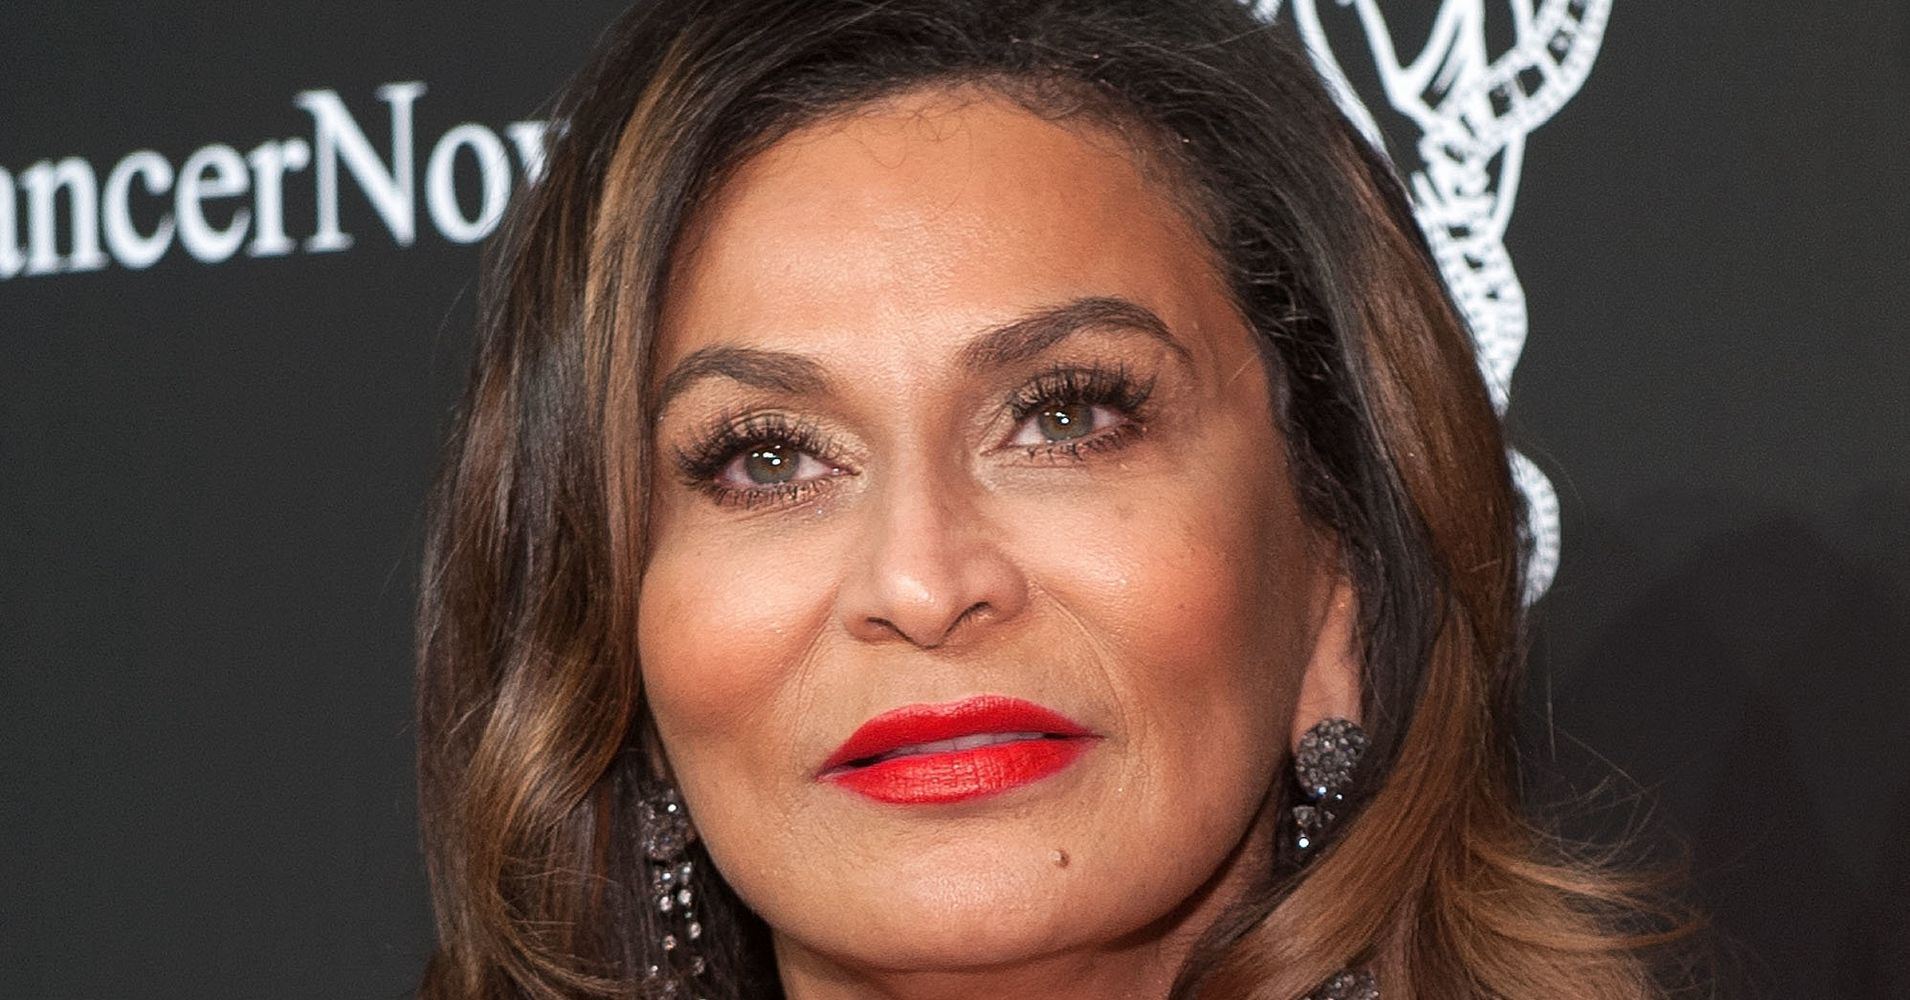 Tina Knowles Donates To Louisiana Flood Victims, Urges Others To Do The ...